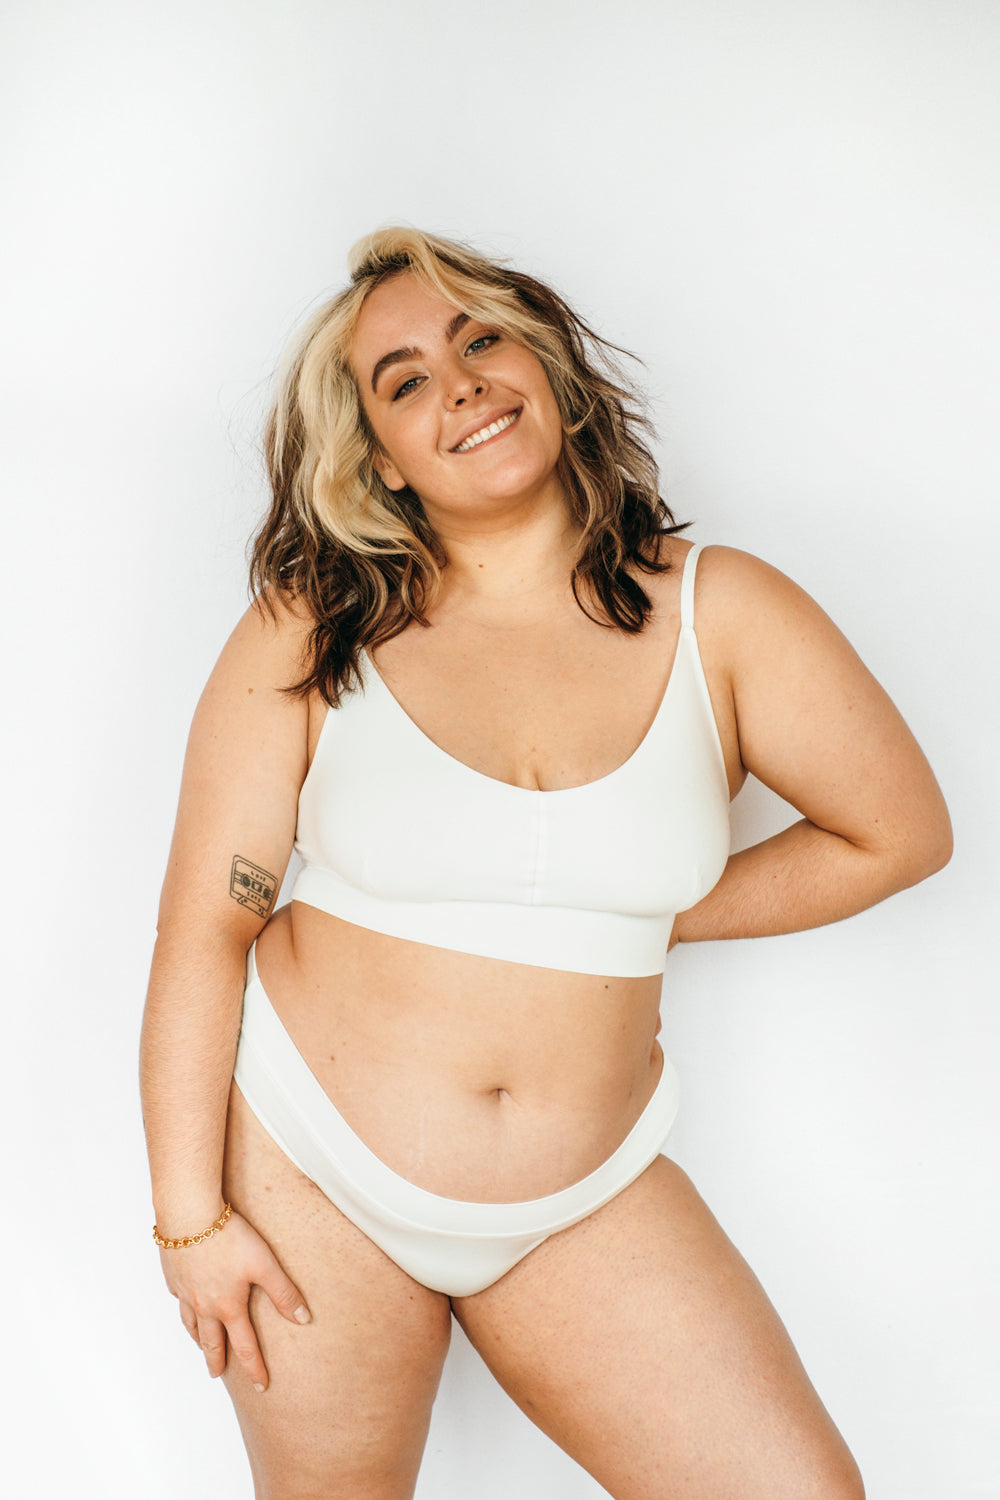 Person with big size wears white underwear made of TENCEL™.